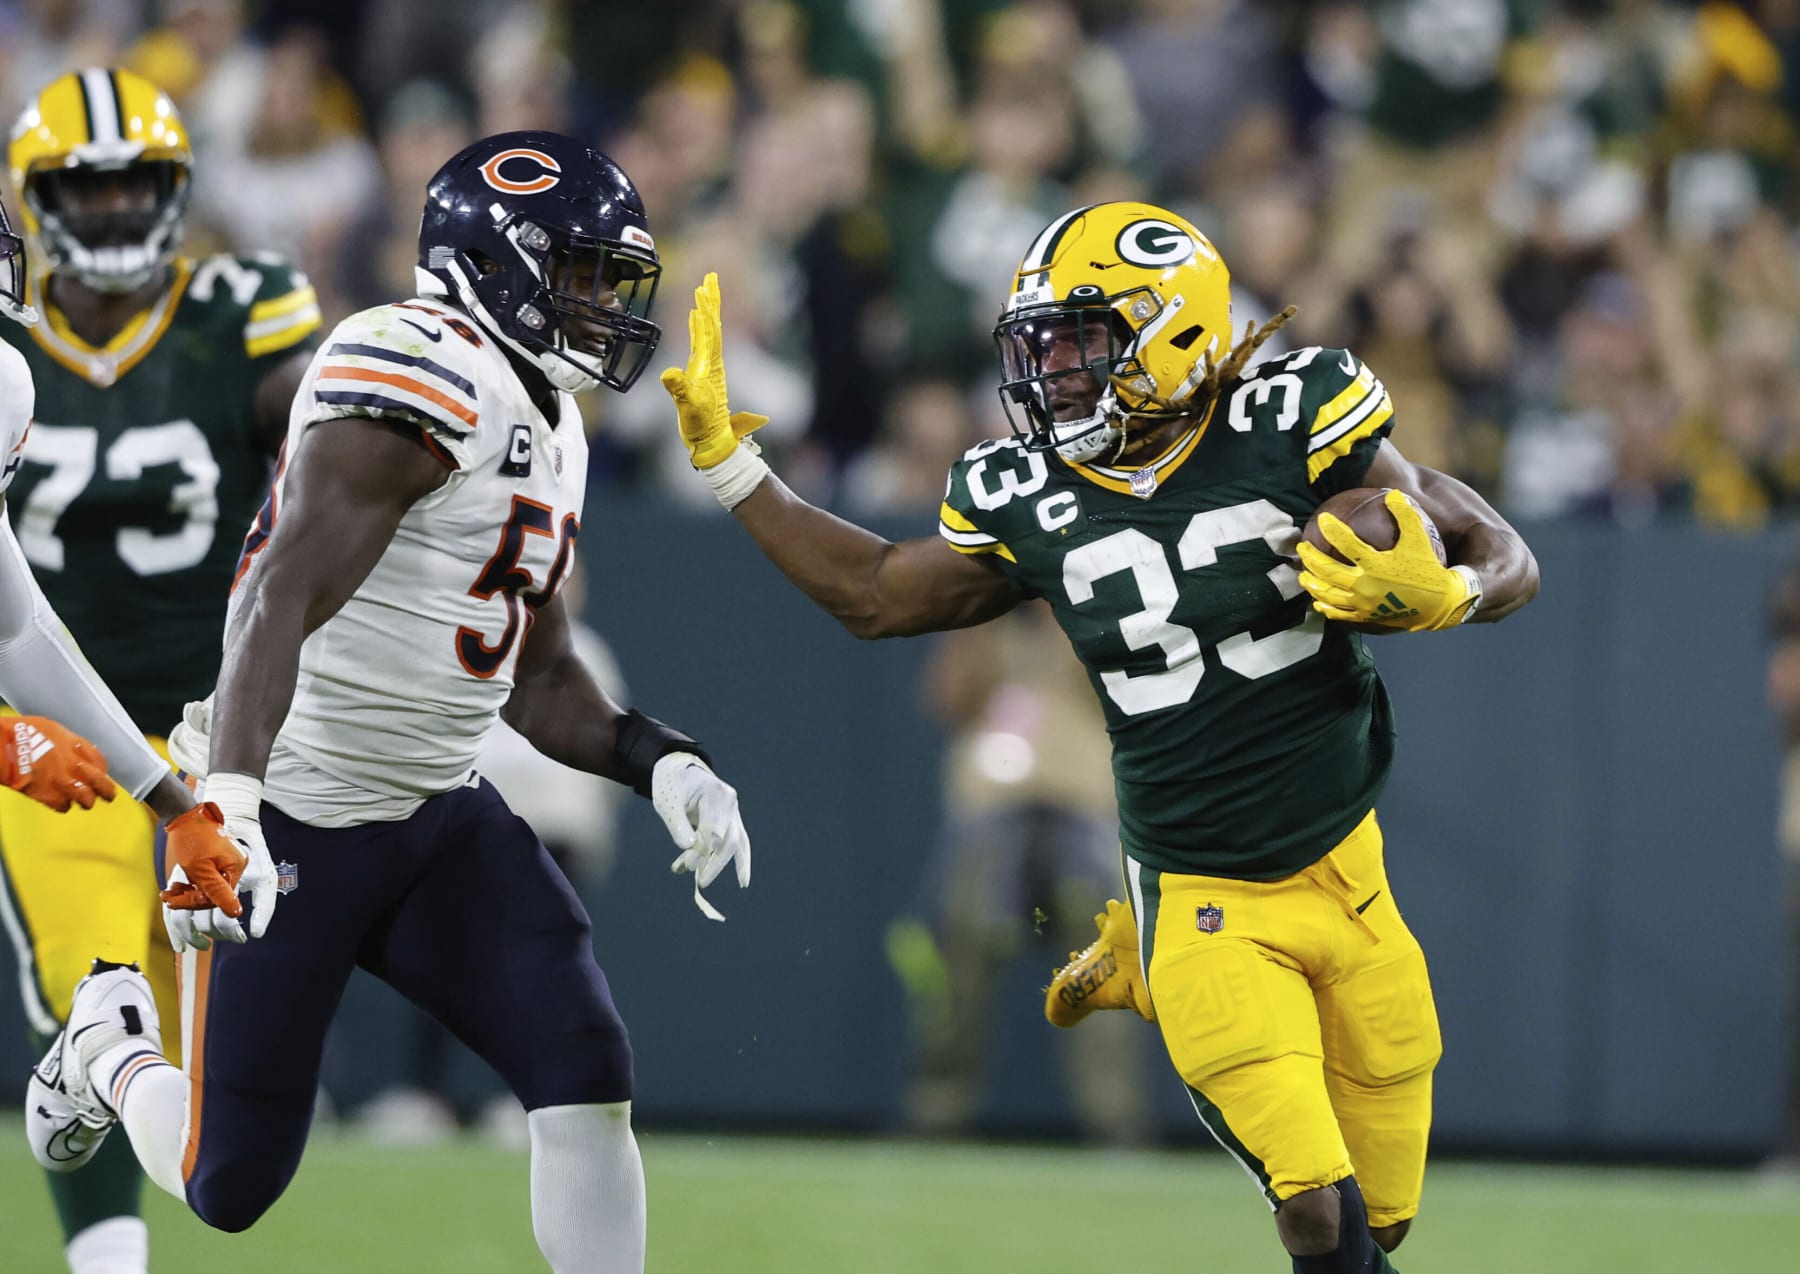 AJ Dillon on Packers' win: 'You got to celebrate, give credit